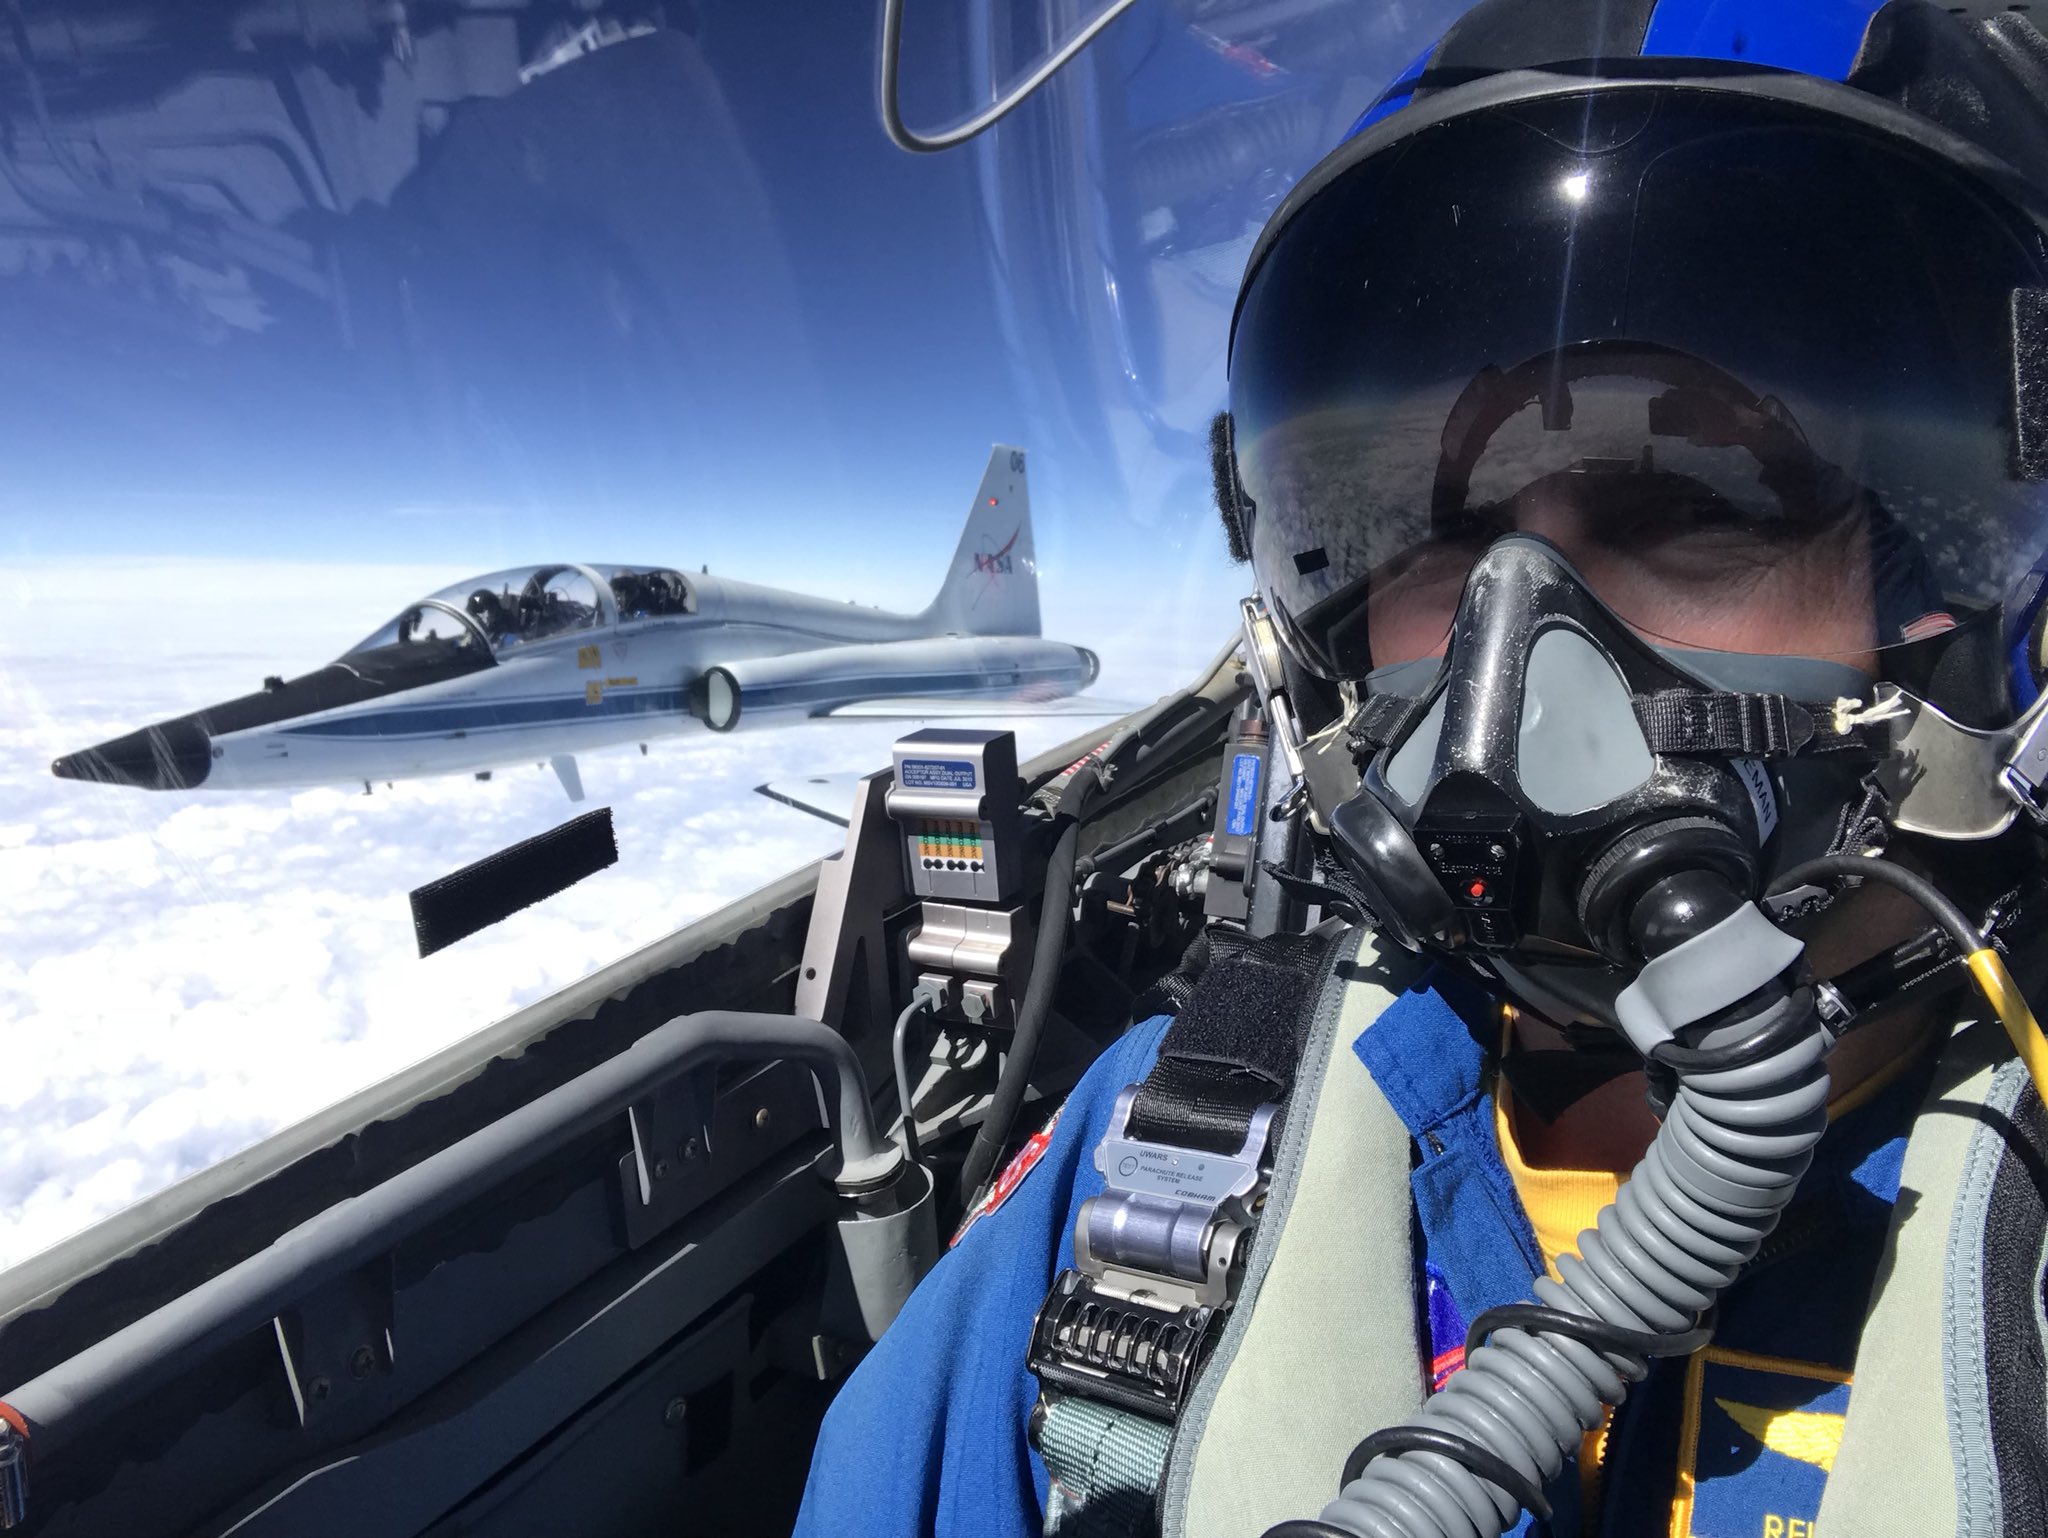 Gregory R. Wiseman clicking a selfie while flying a fighter jet